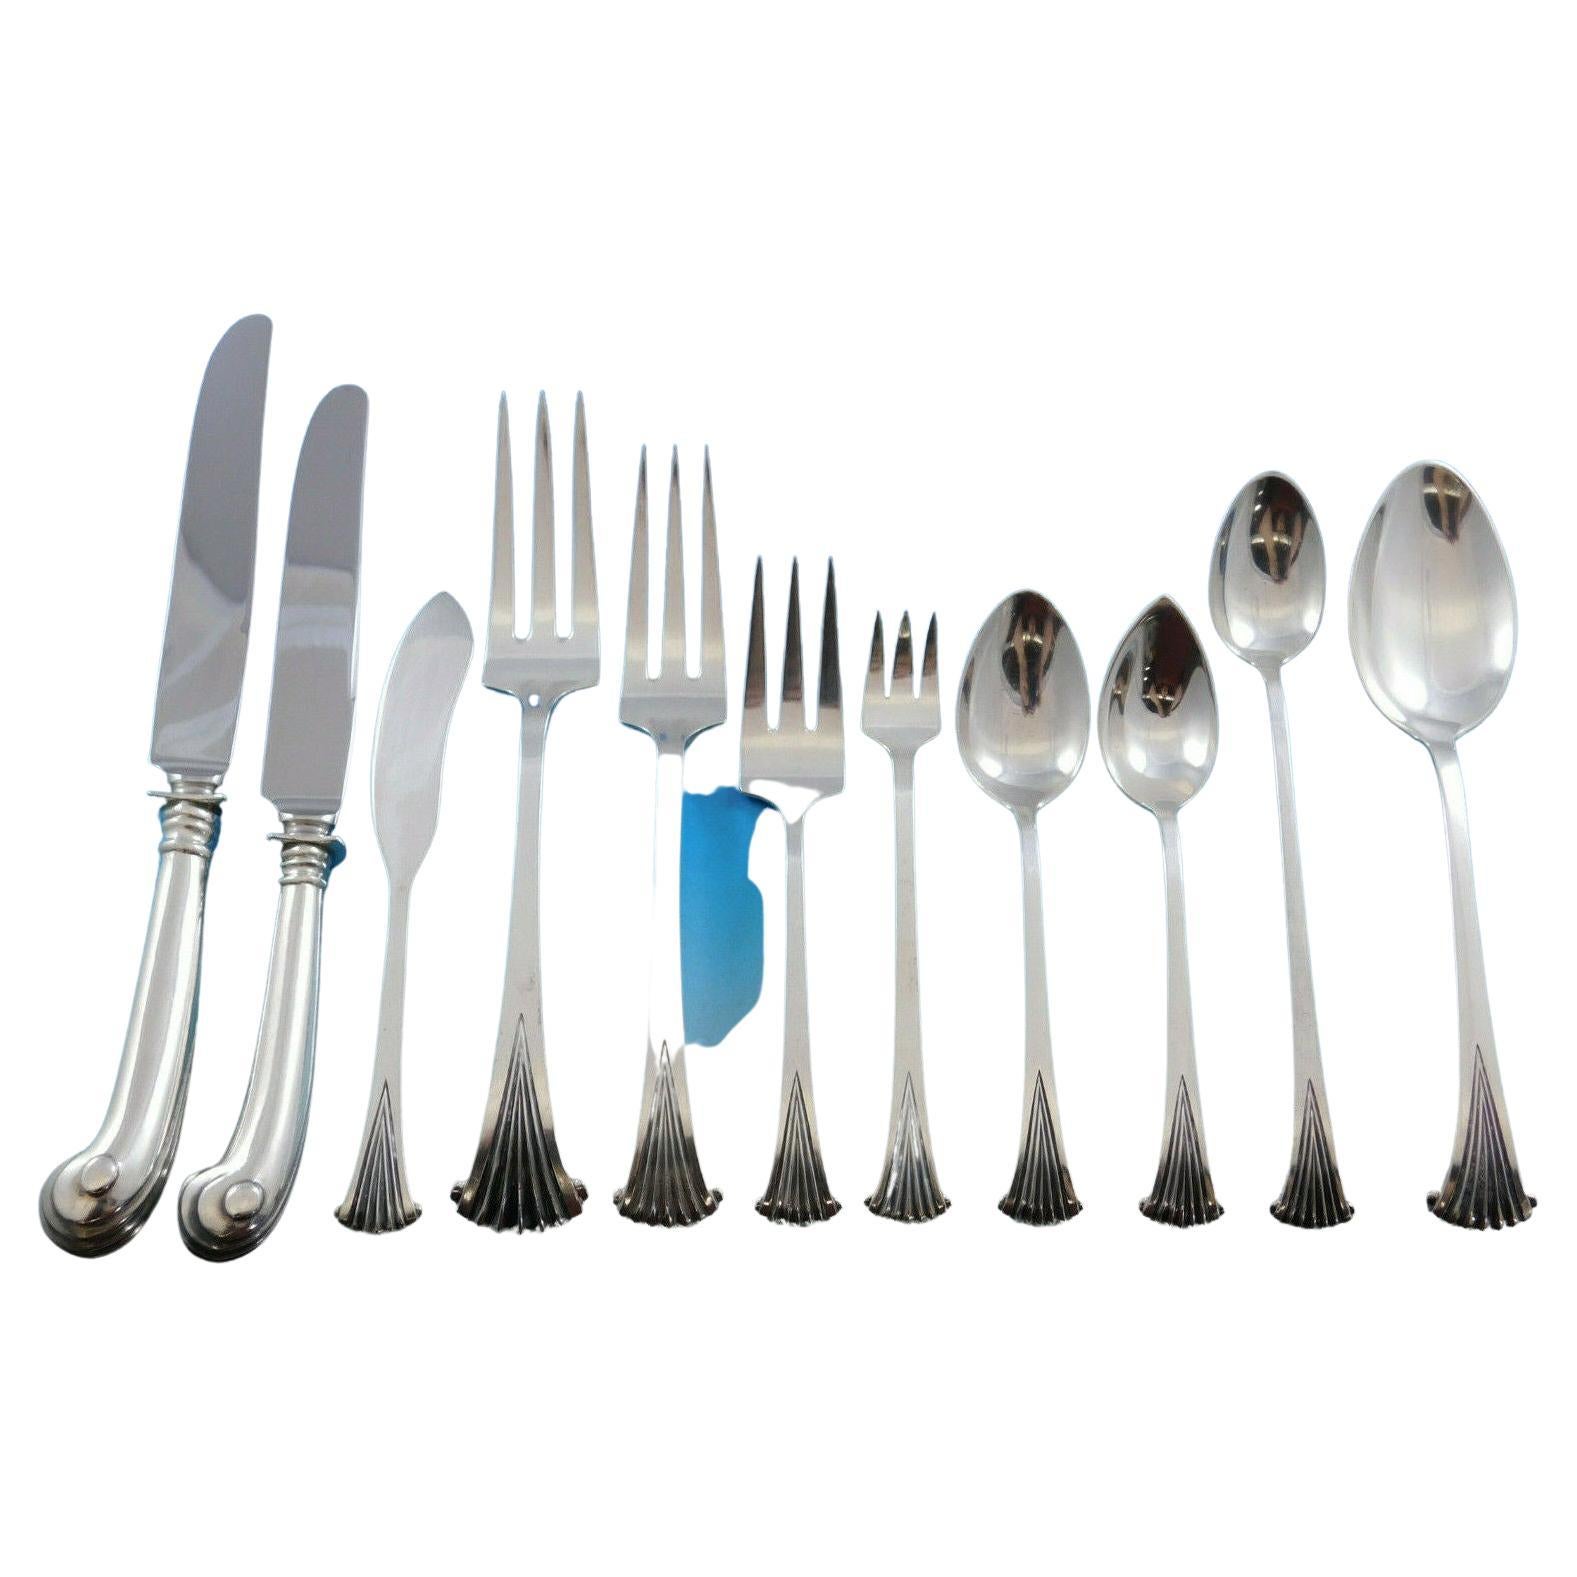 Onslow is finely crafted of heavier weight sterling silver. Impressive in the hand with dramatic pistol handles it is perfect for traditional to transitional tablescapes. This versatile design will transform all of your meals into a special dining